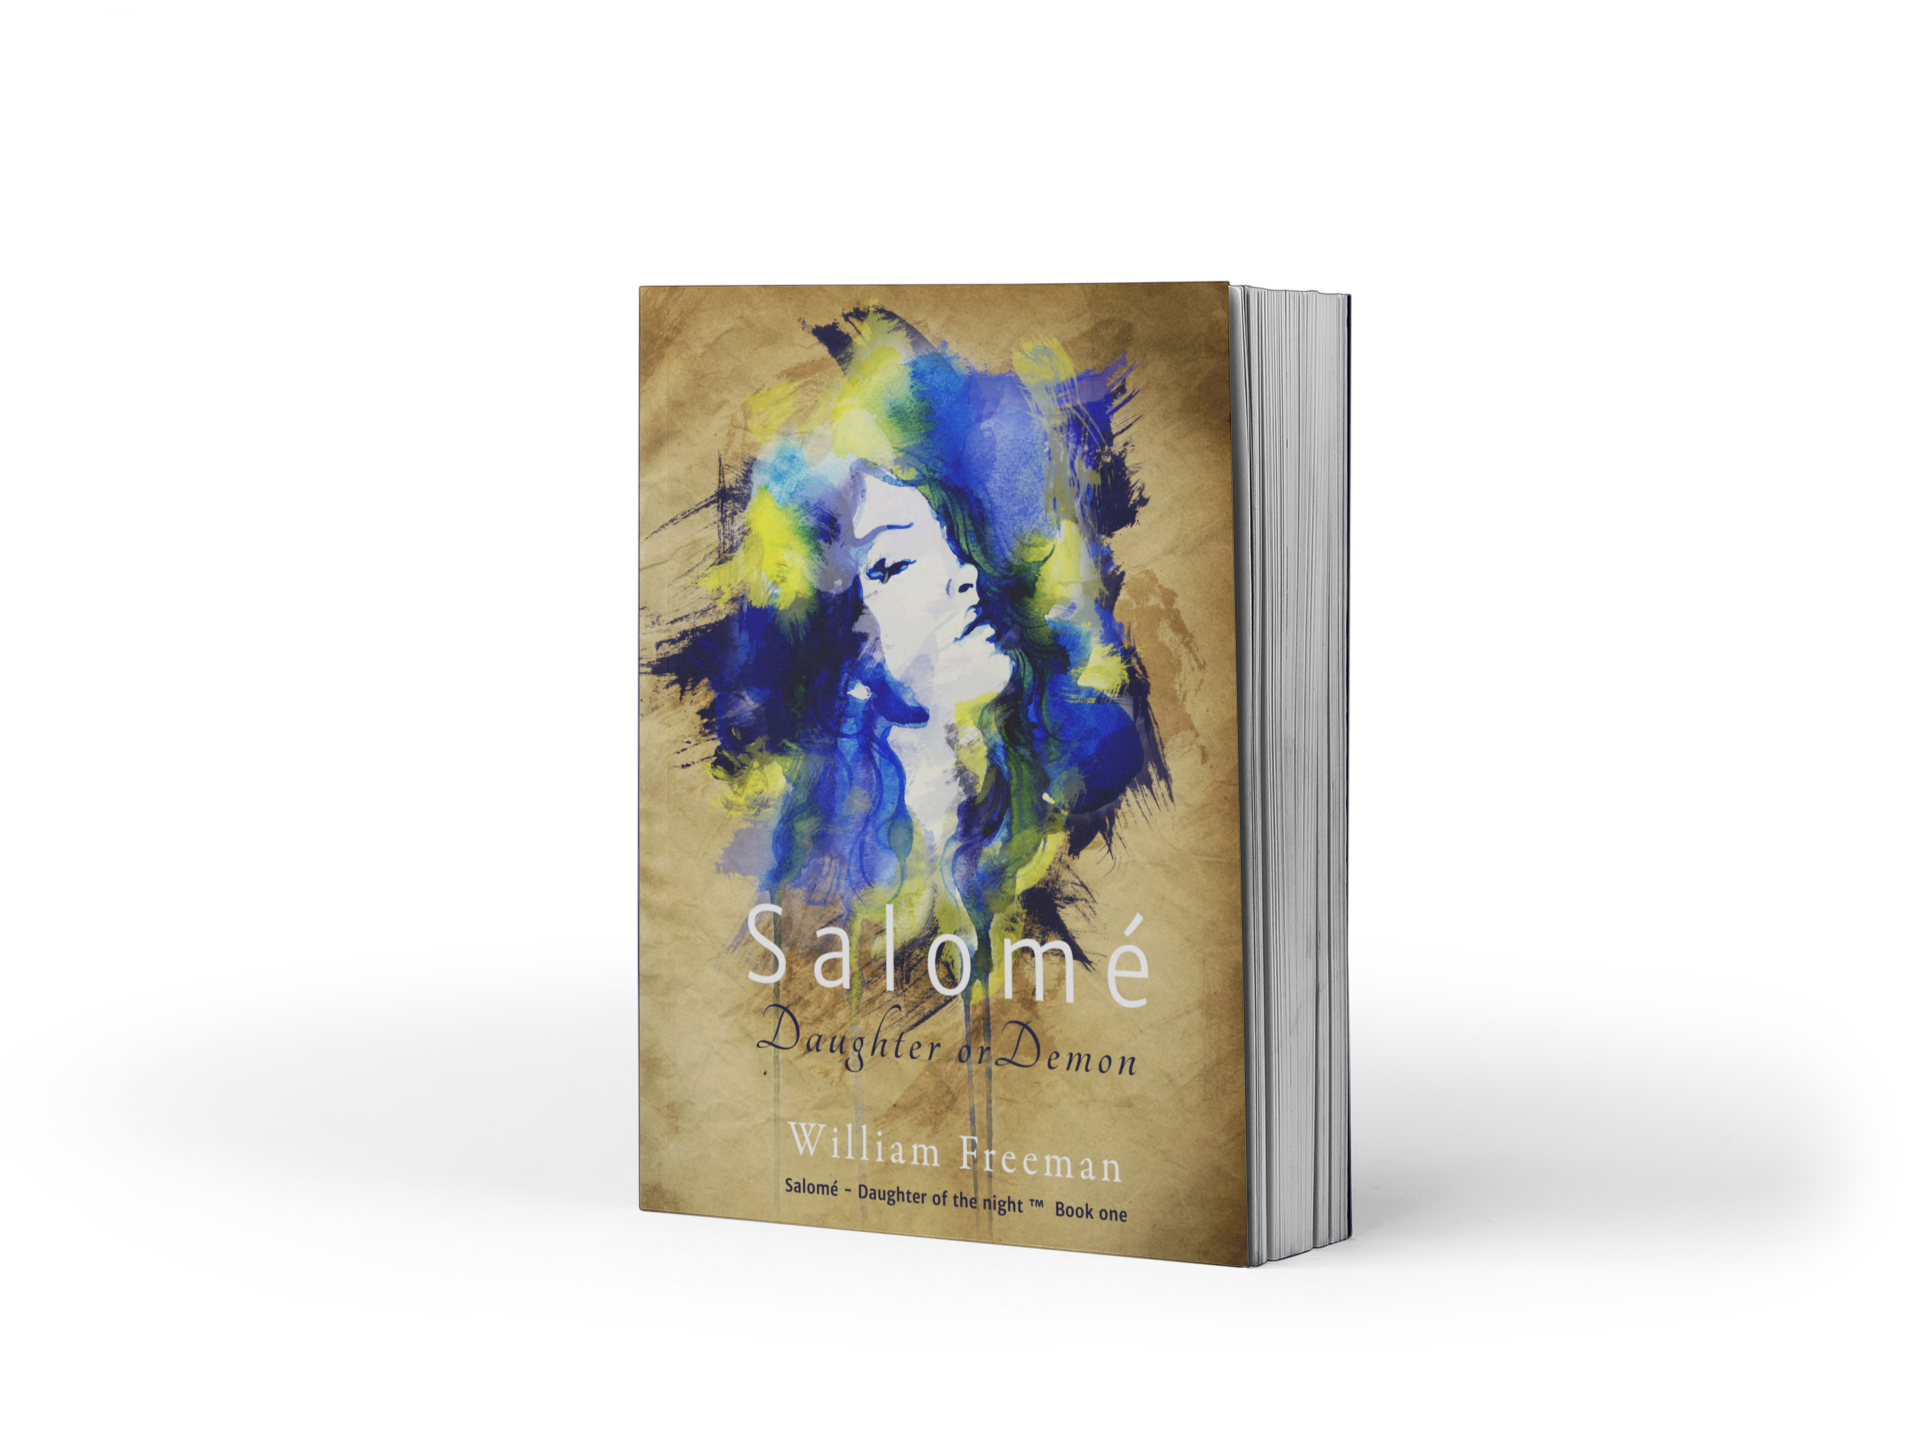 Salomé _- _Daughter_or _Demon_book_standing_upright